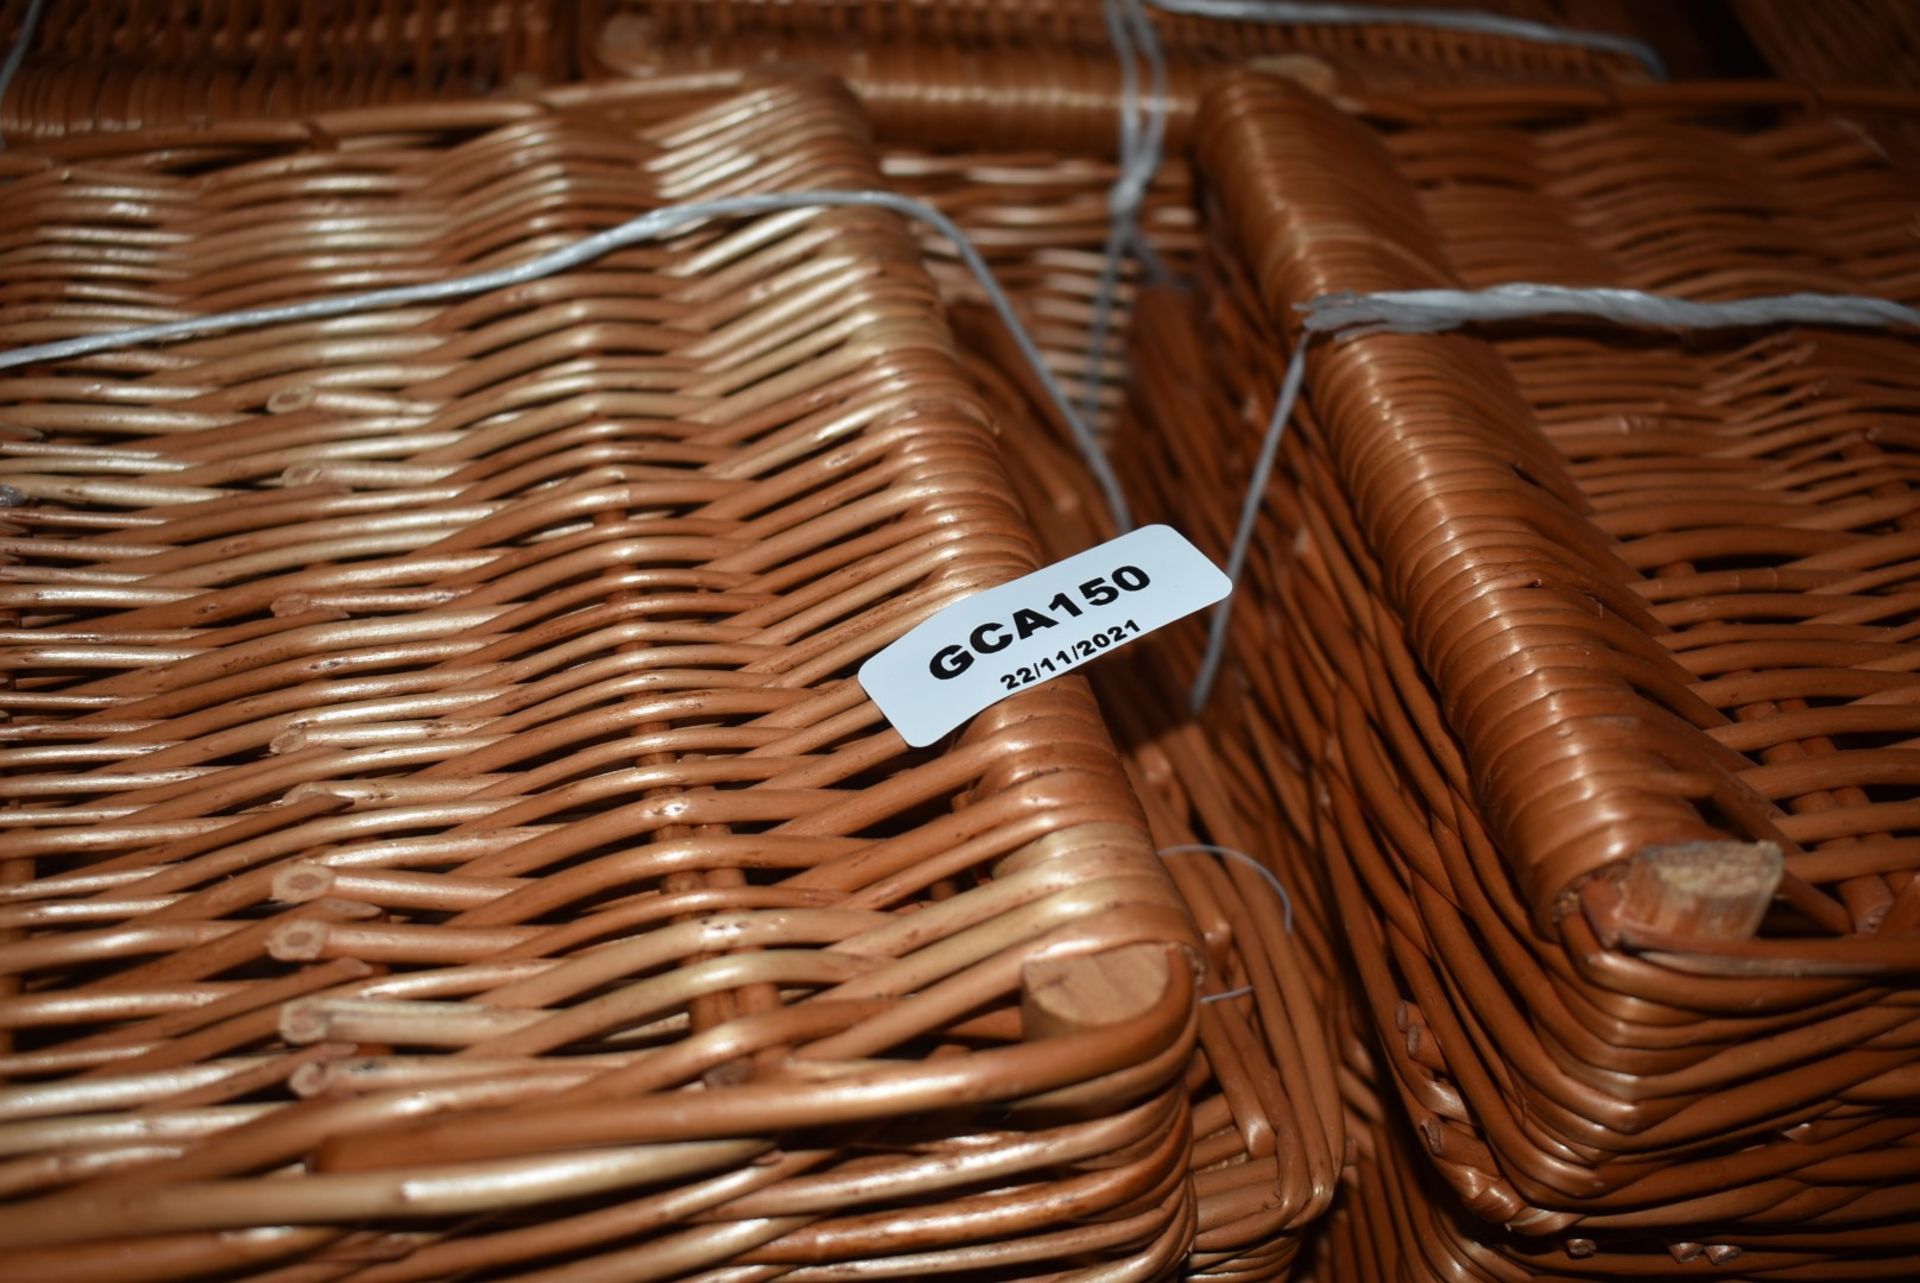 8 x Hand Woven Retail Display Sloping Wicker Baskets - Ideal For Presentation in Wide Range of - Image 2 of 10